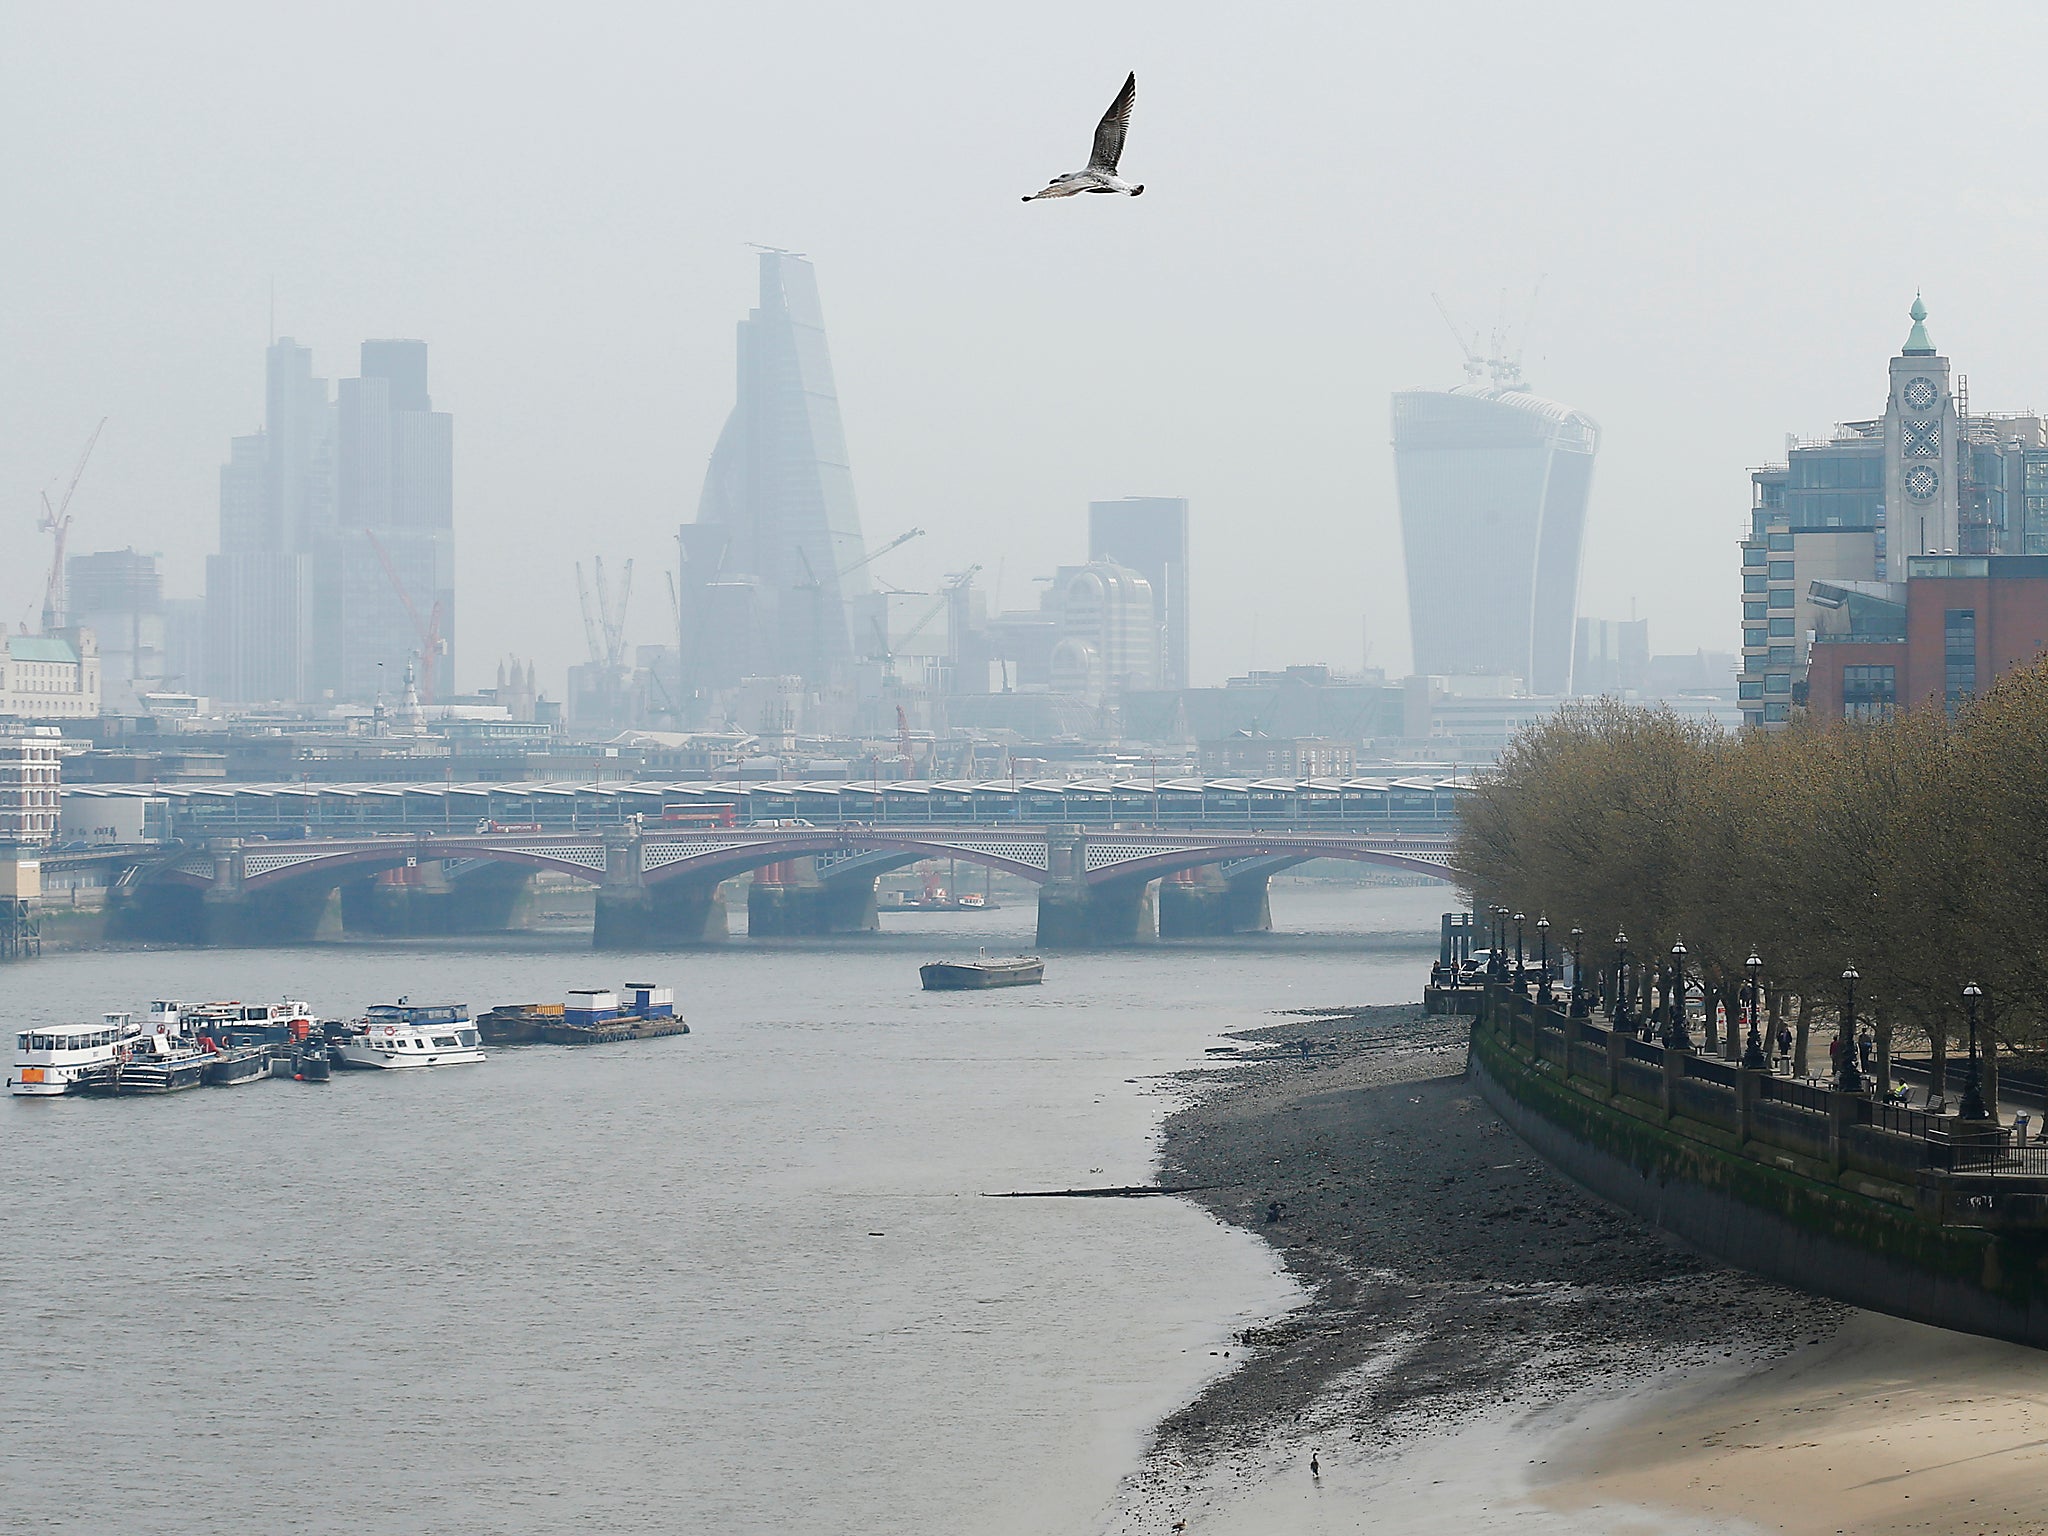 The London skyline appears veiled in smog. The city is breaking WHO limits for nitrogen dioxide